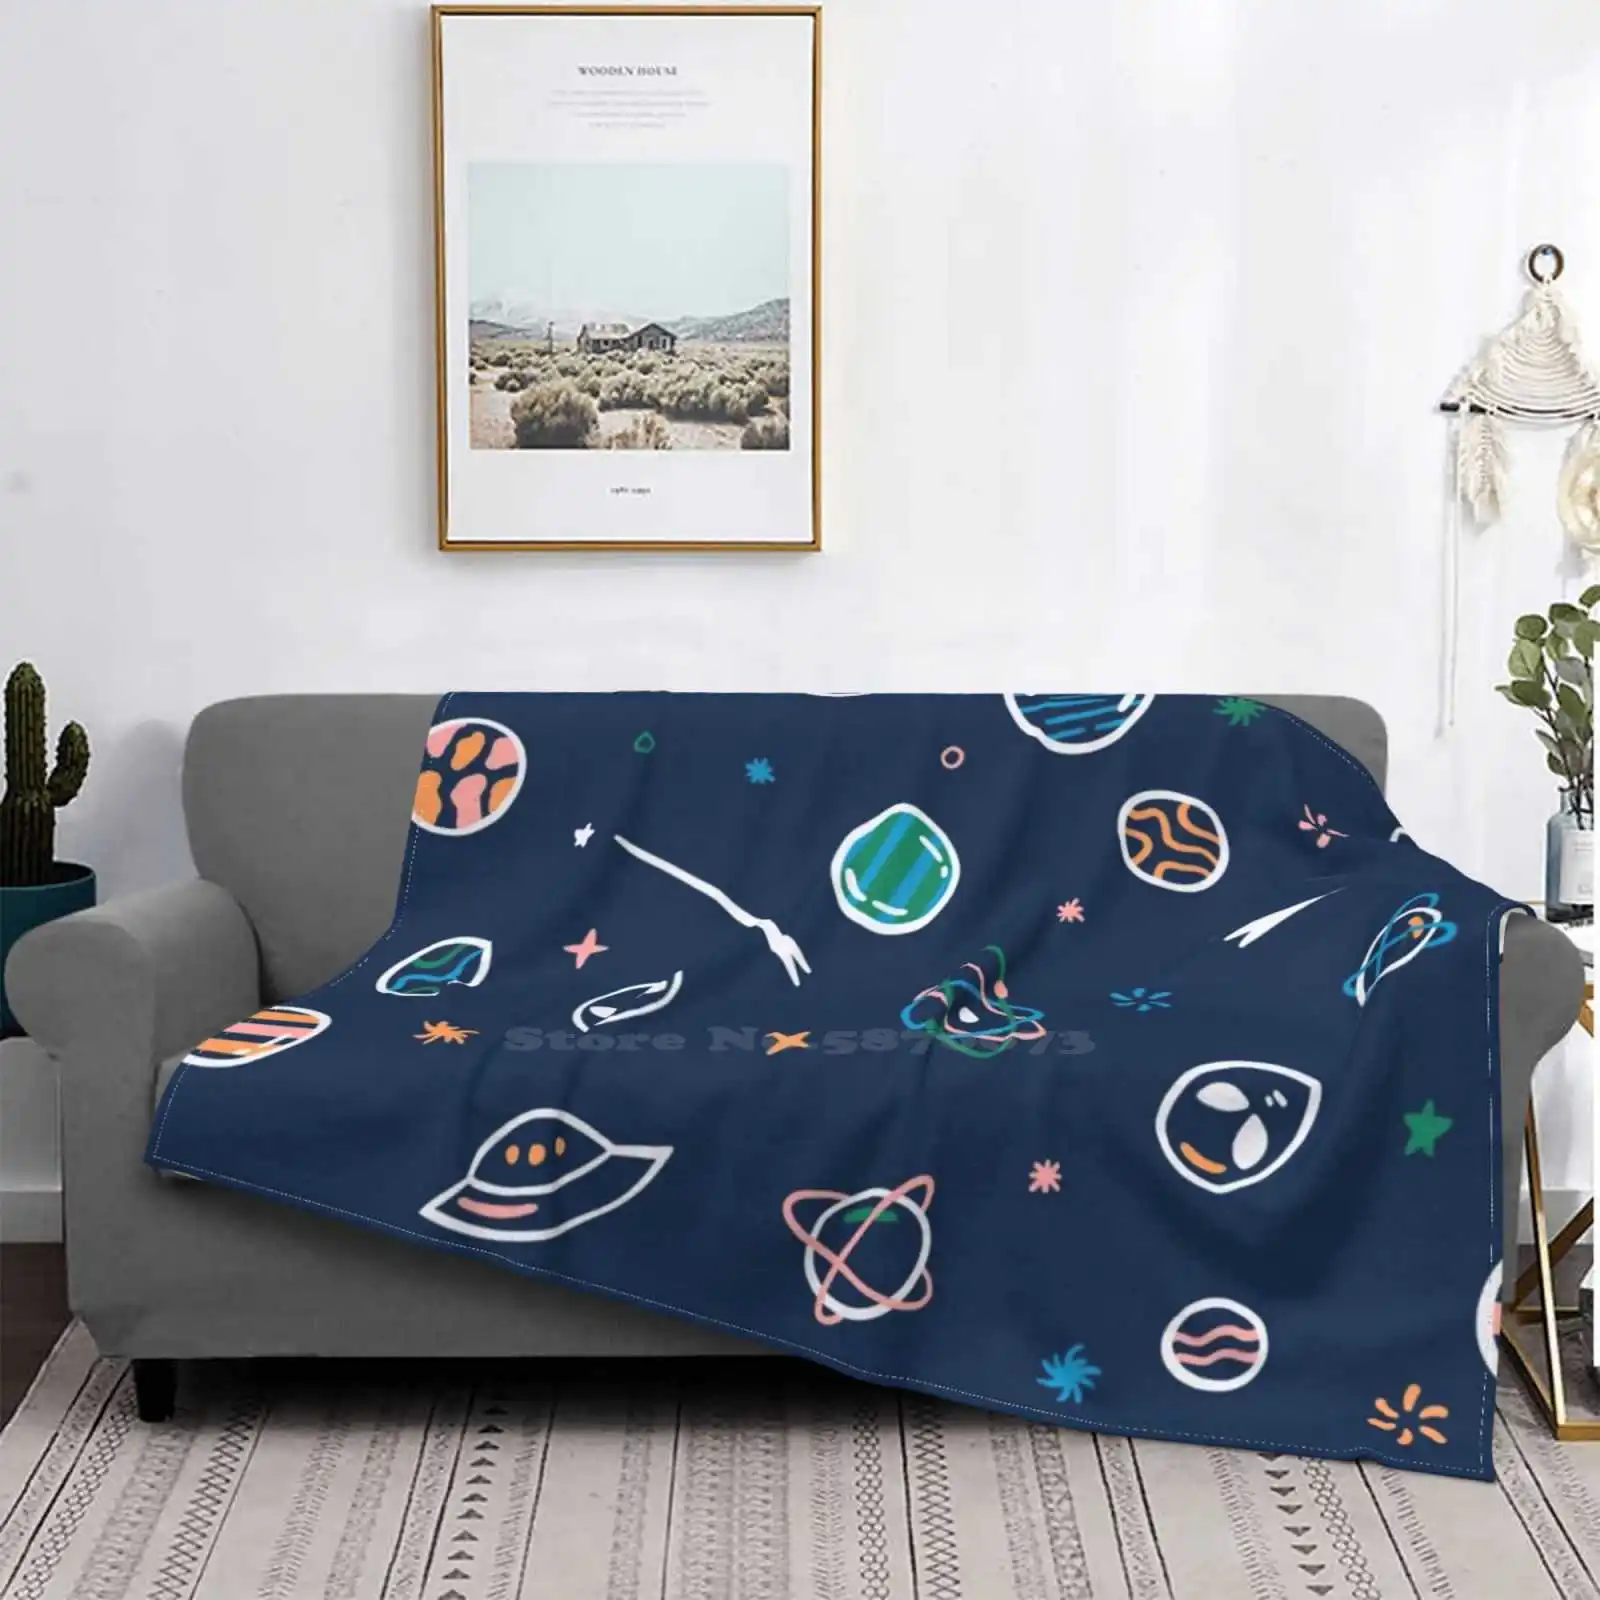 

Space L Mouth Mask Super Warm Soft Blankets Throw On Sofa/Bed/Travel Space Ufo Spaceship Stars Galaxy